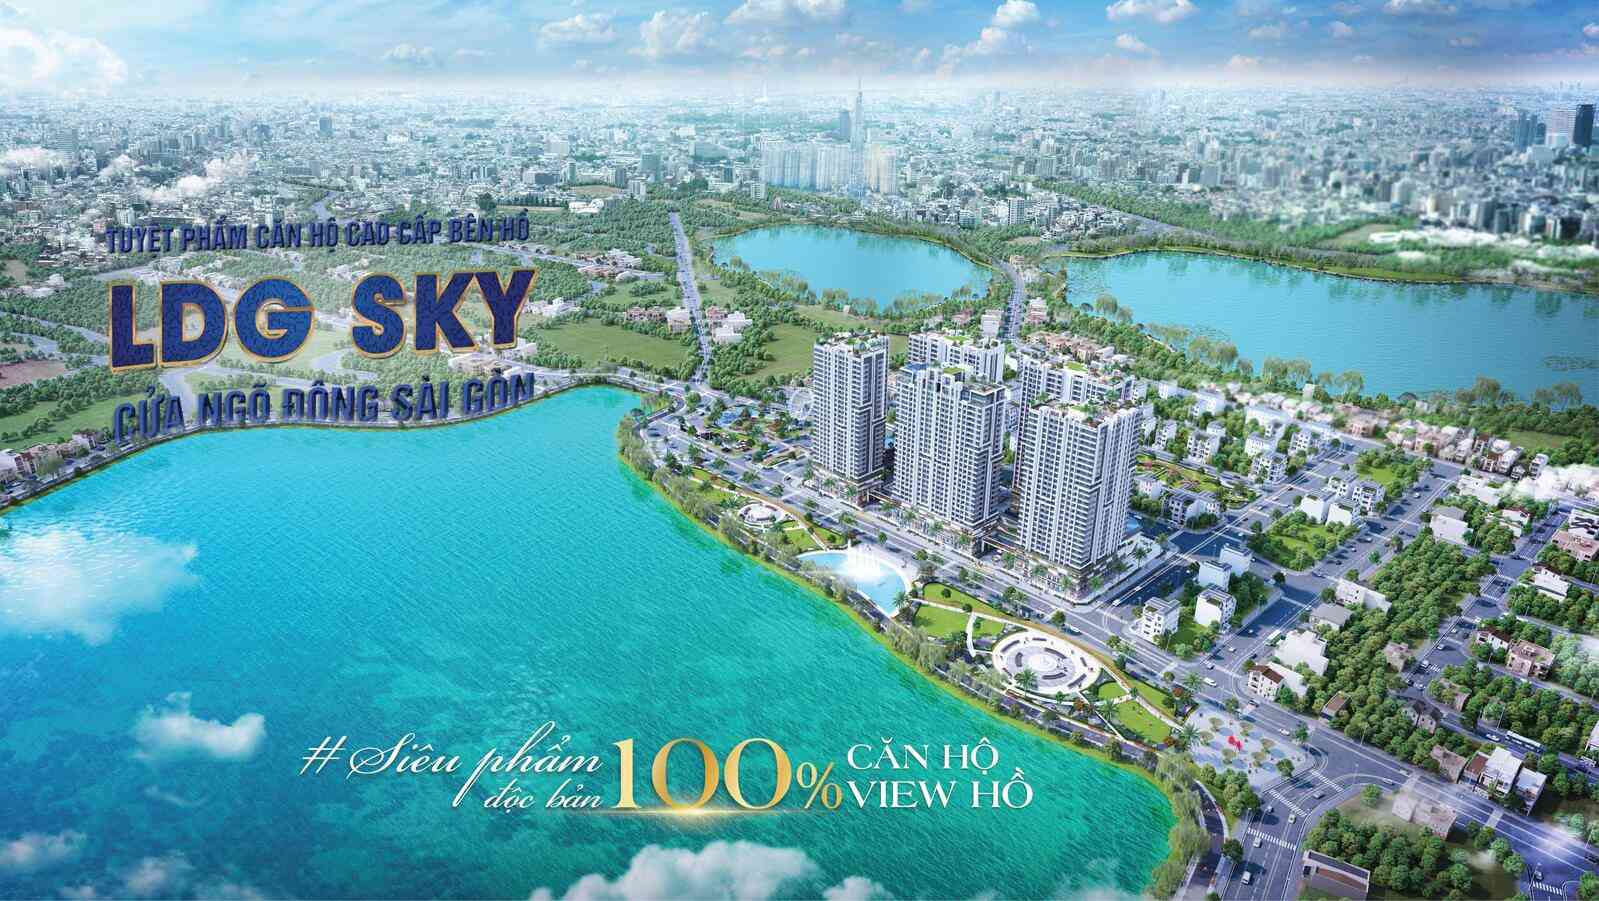 LDG Sky - A unique product of 100 Lake view apartments